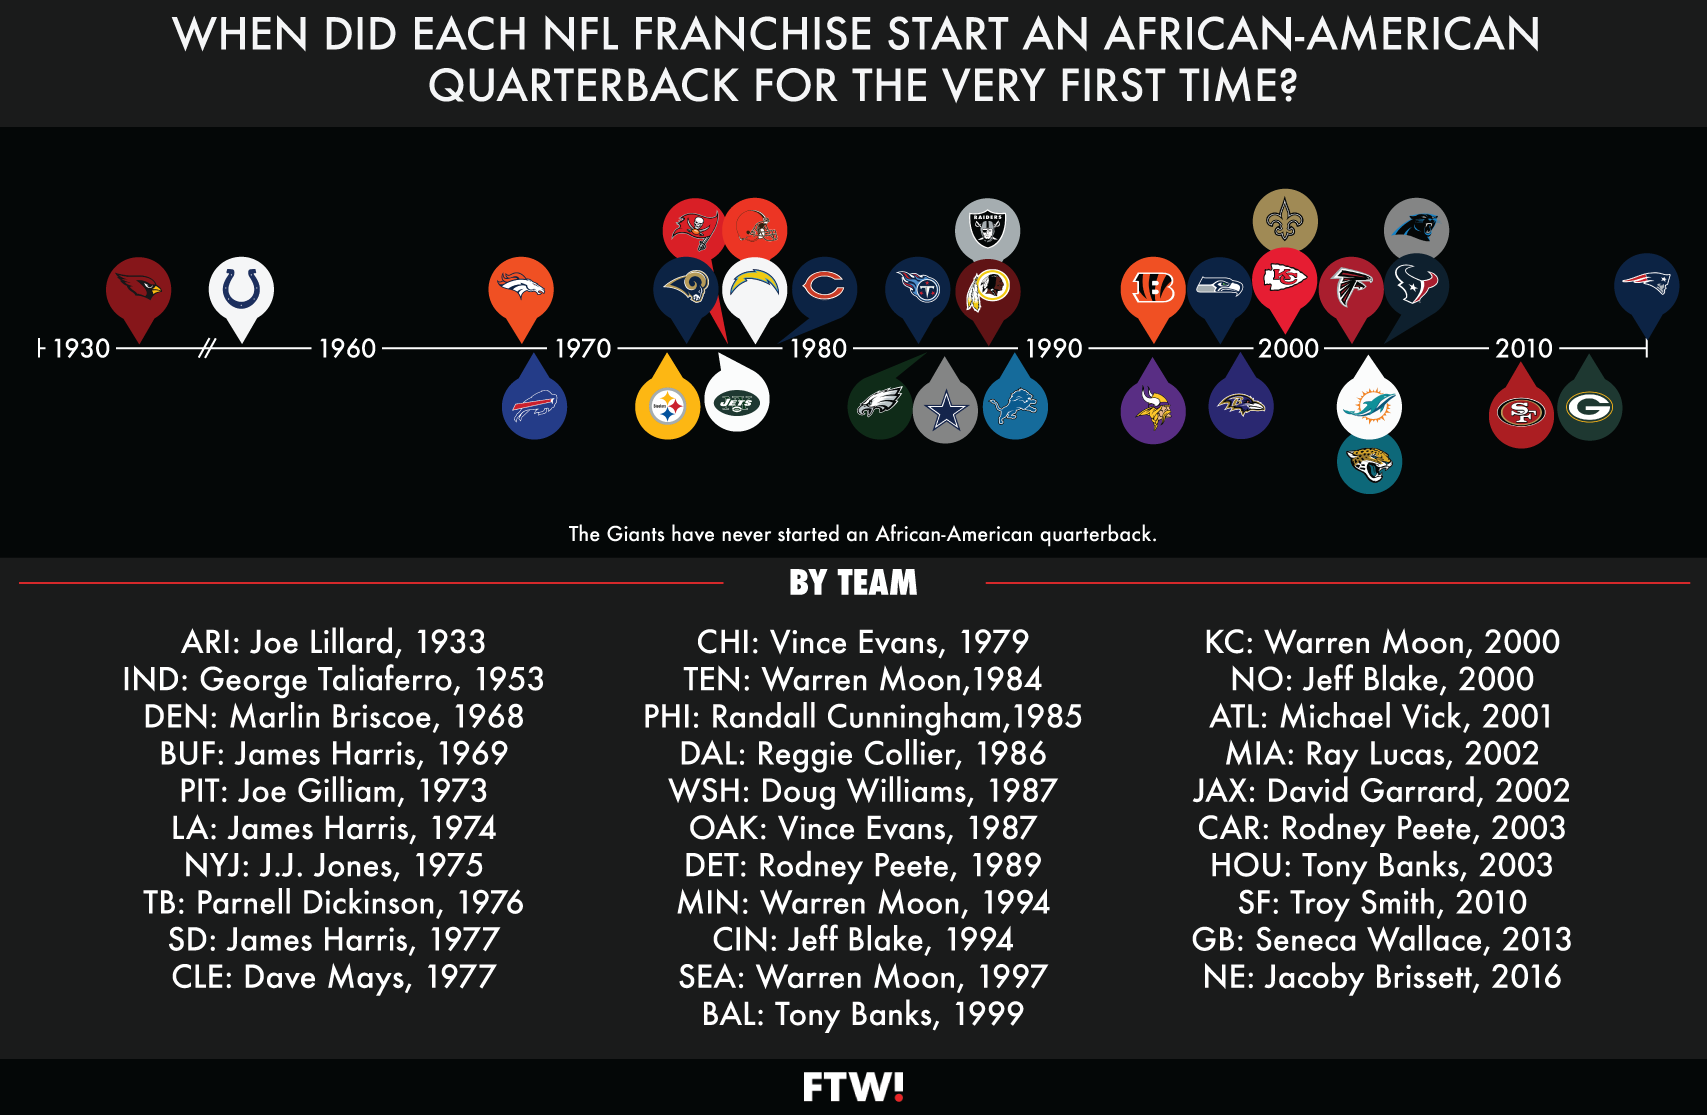 A timeline of when each NFL team started its first African-American